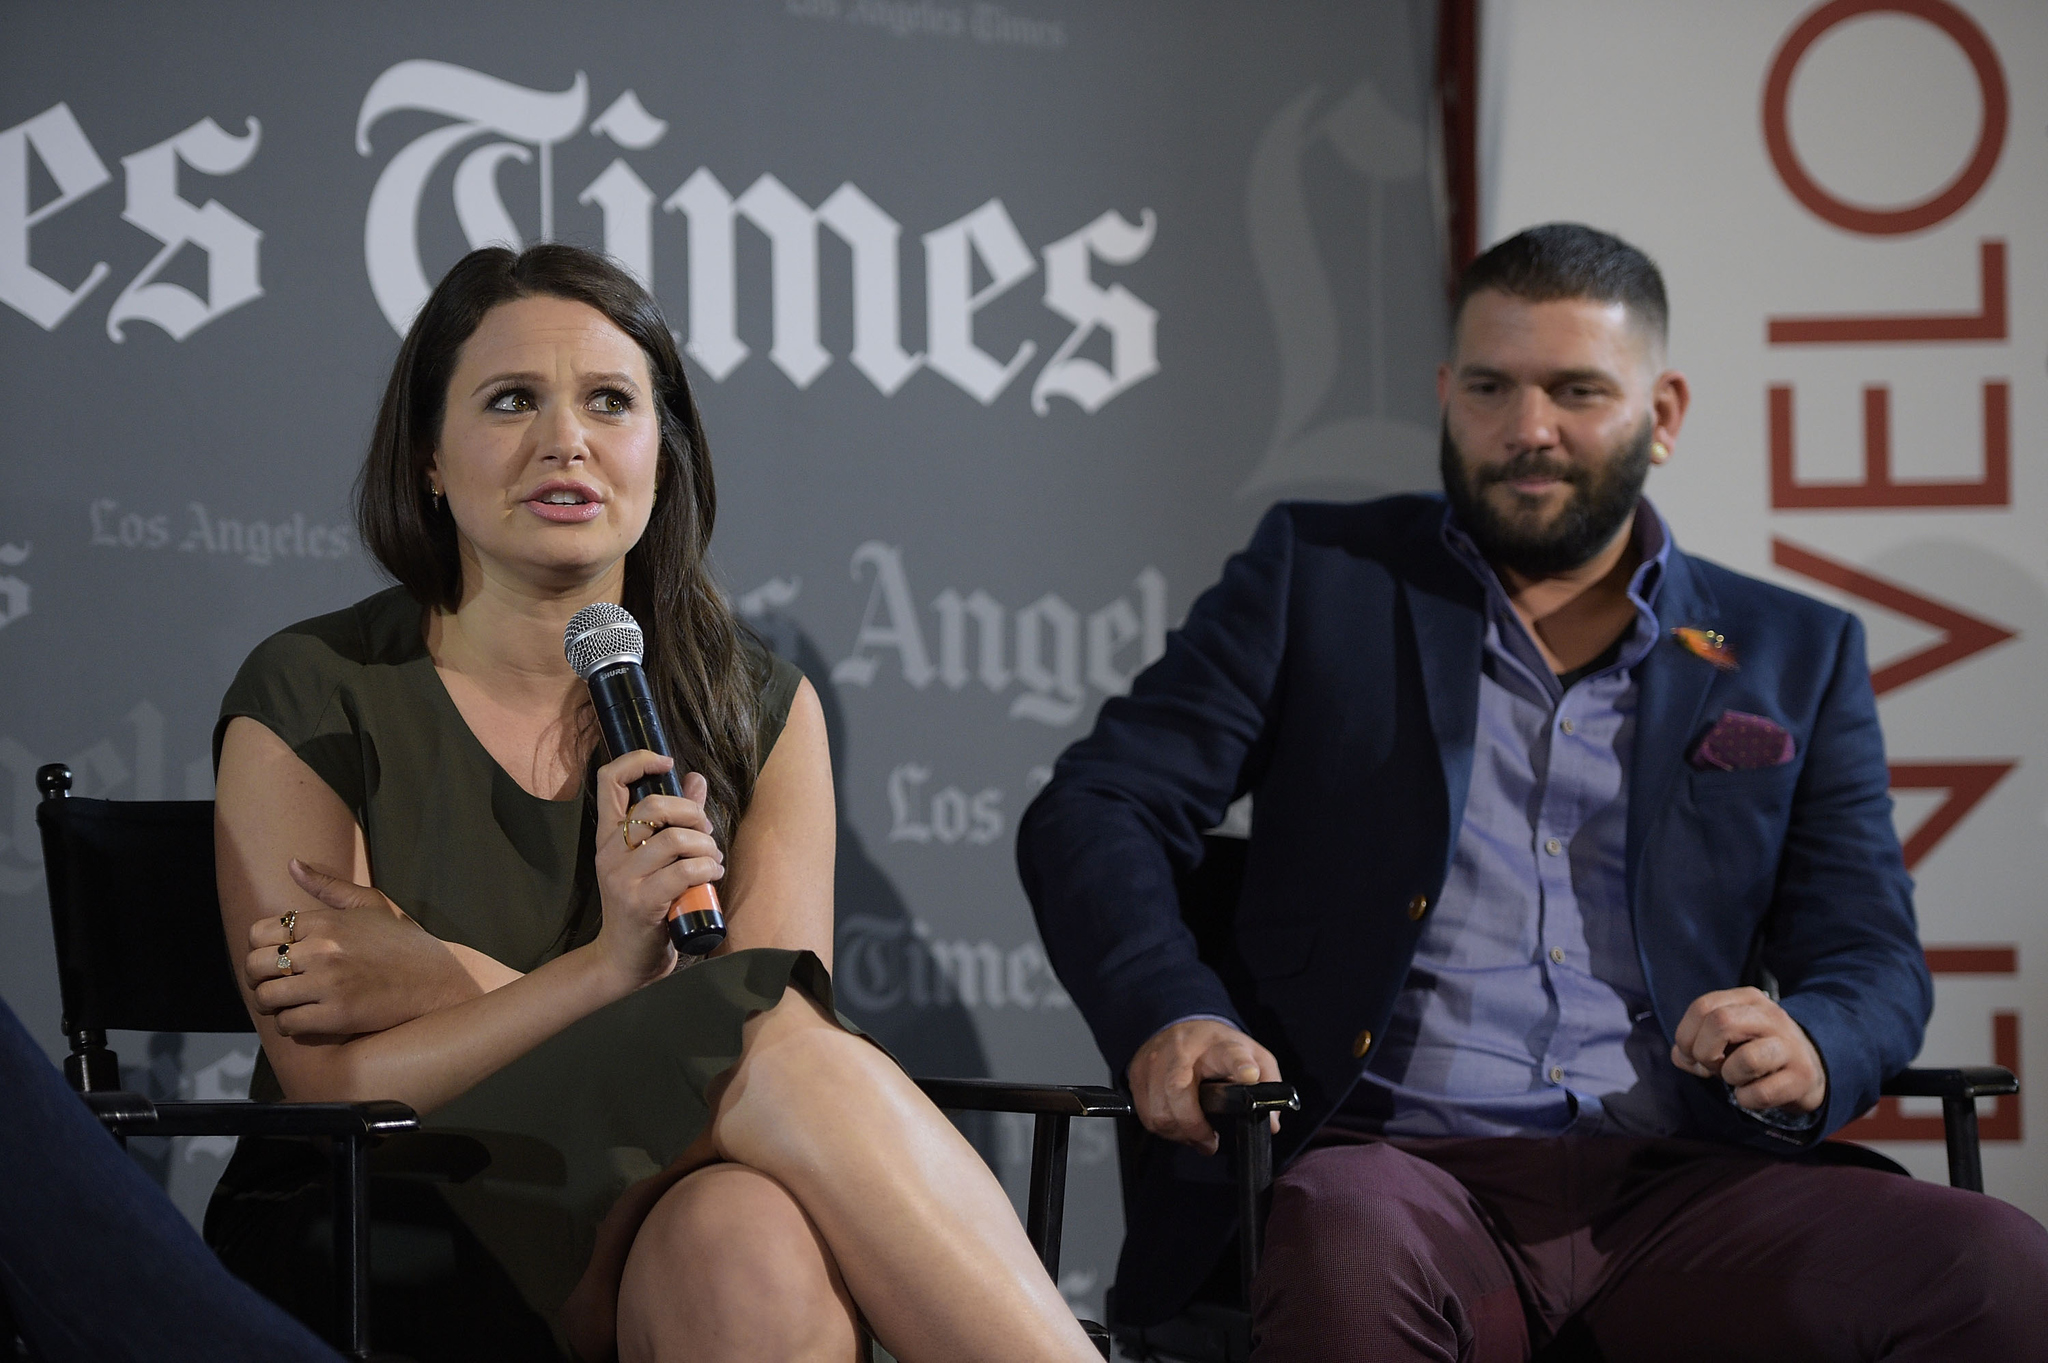 Guillermo Diaz and Katie Lowes